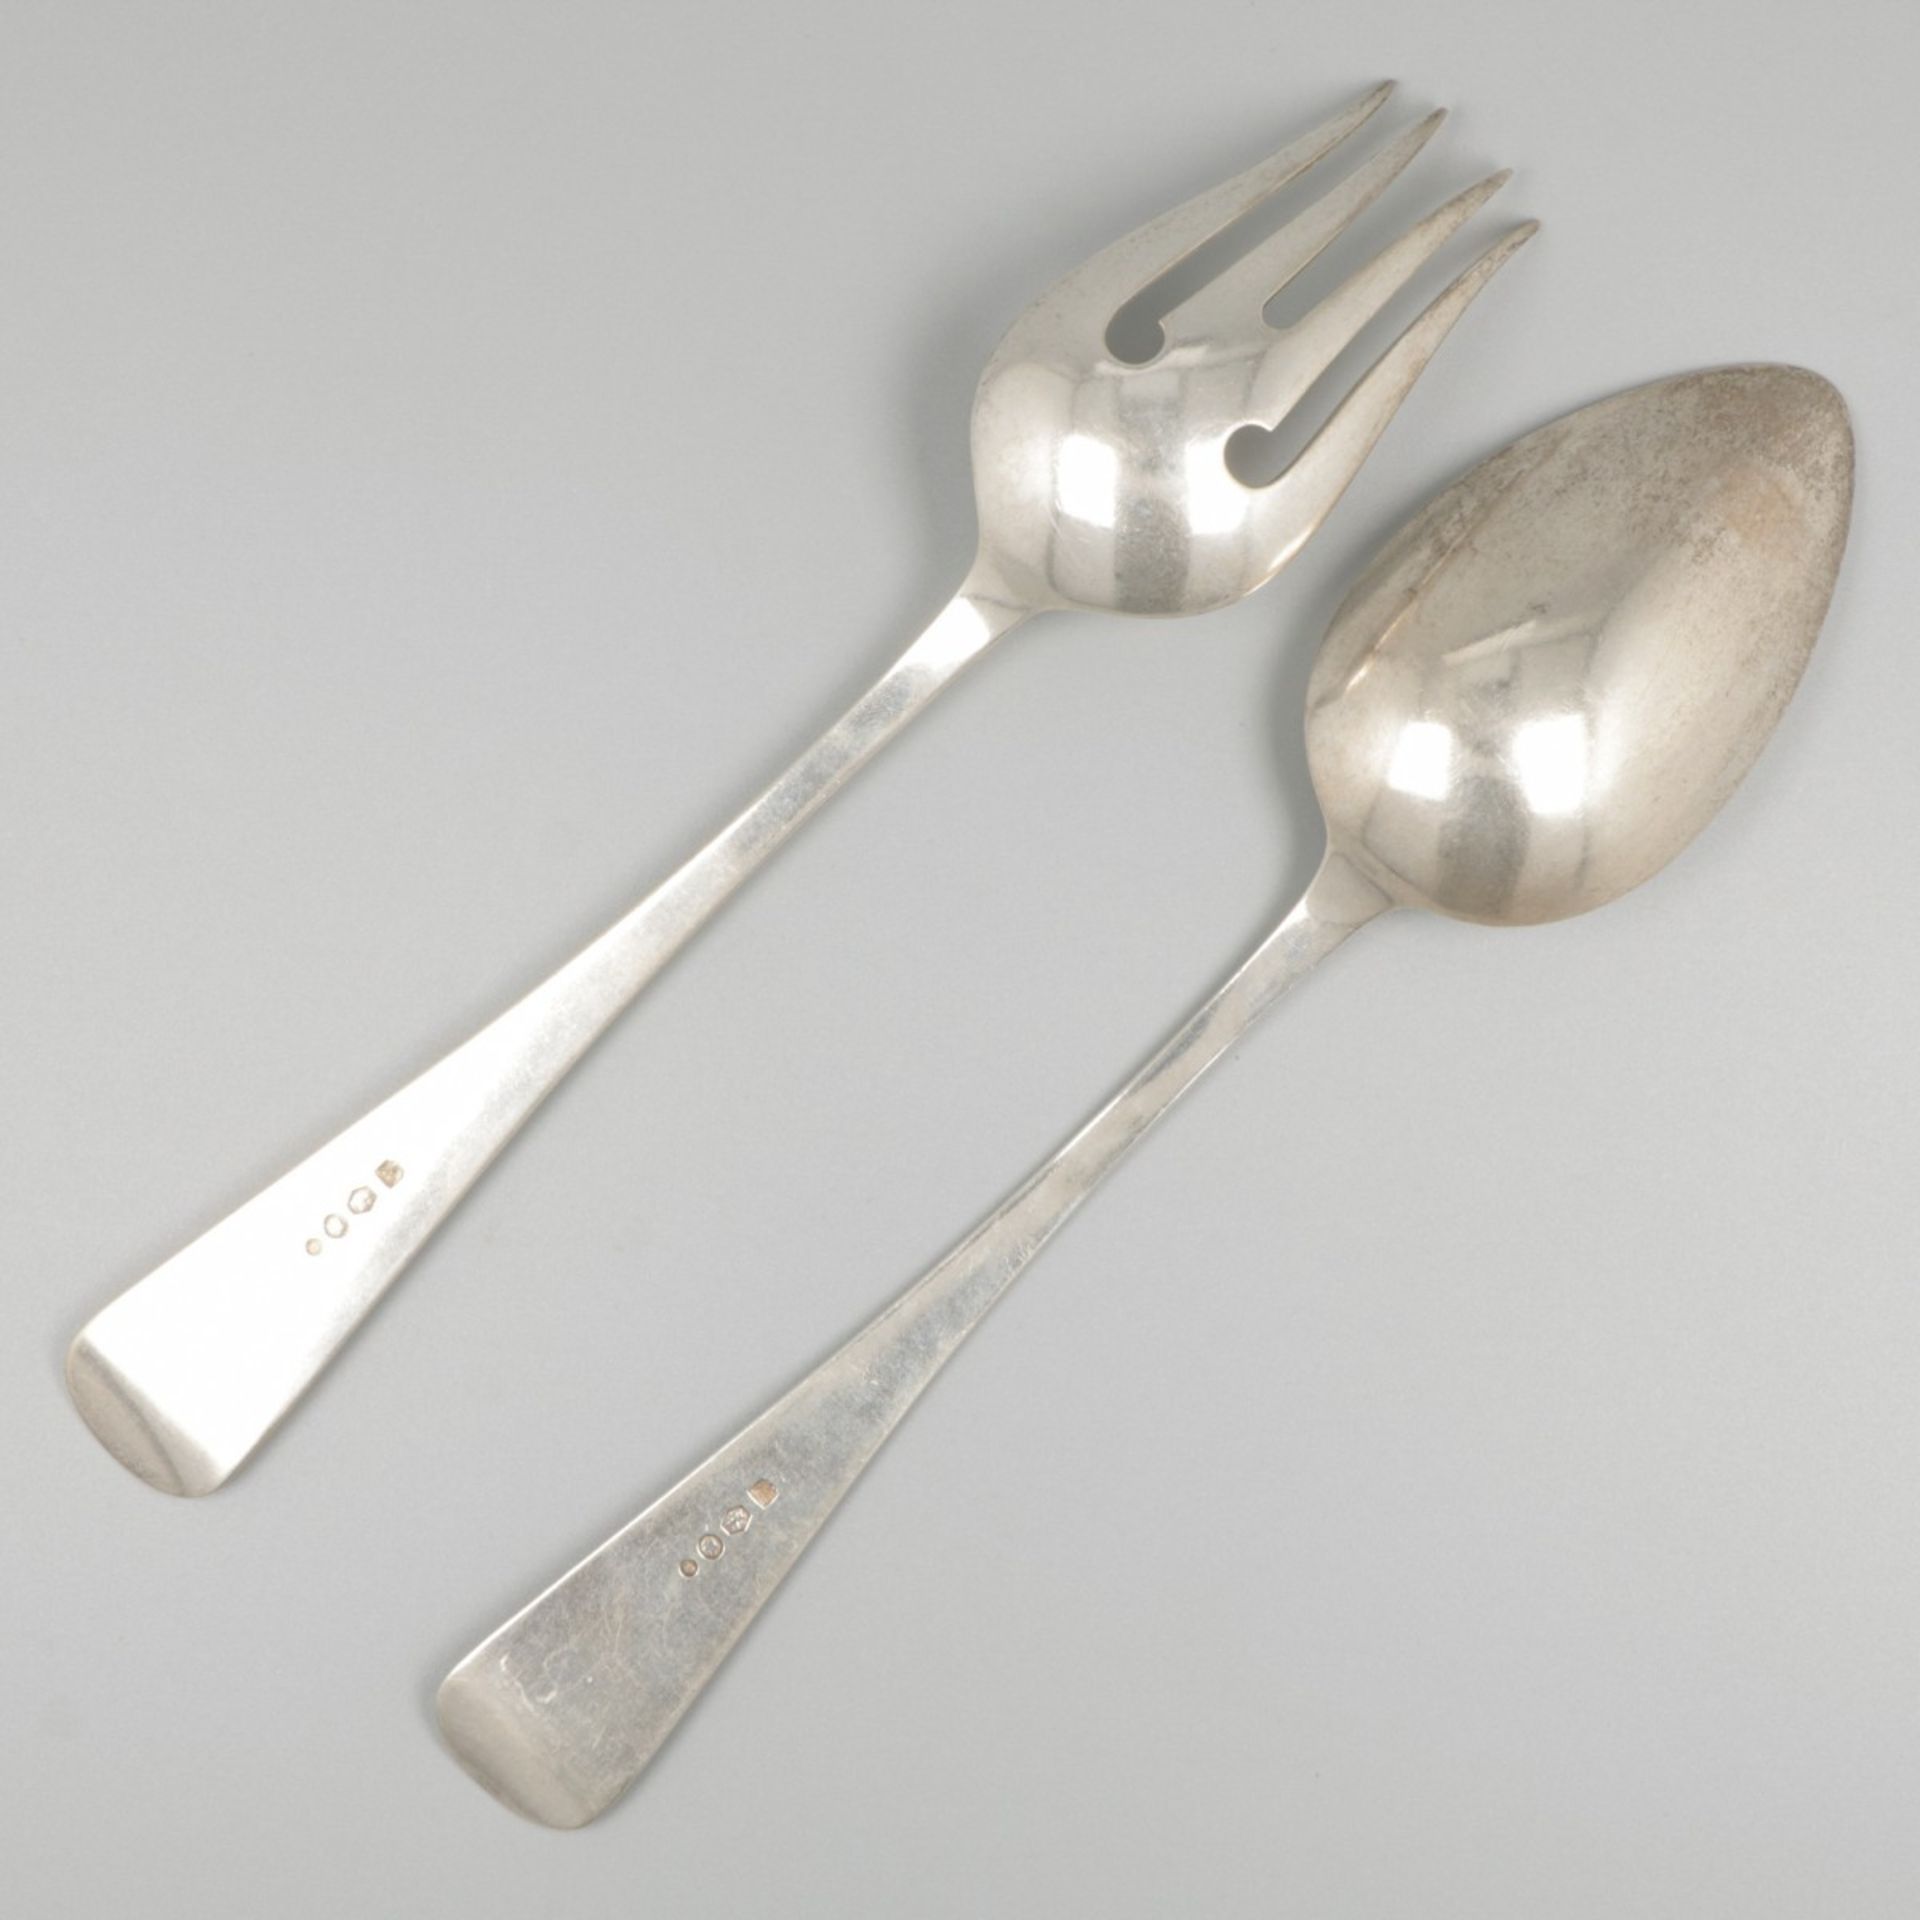 Salad servers ''Haags Lofje'' silver. - Image 2 of 9